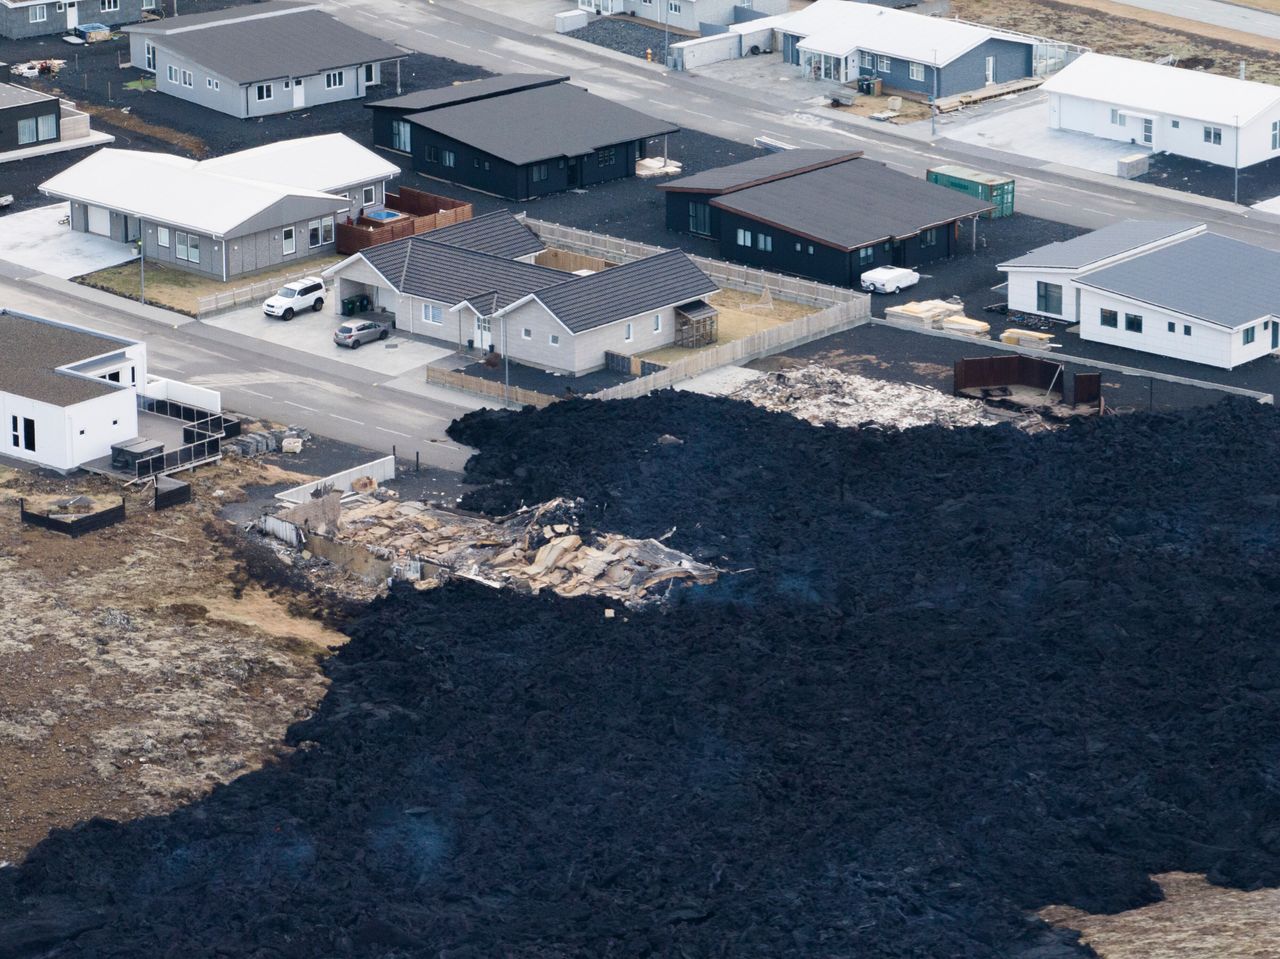 An aerial view of the lava flow front in the town on Monday. Iceland's president says the country is battling "tremendous forces of nature."